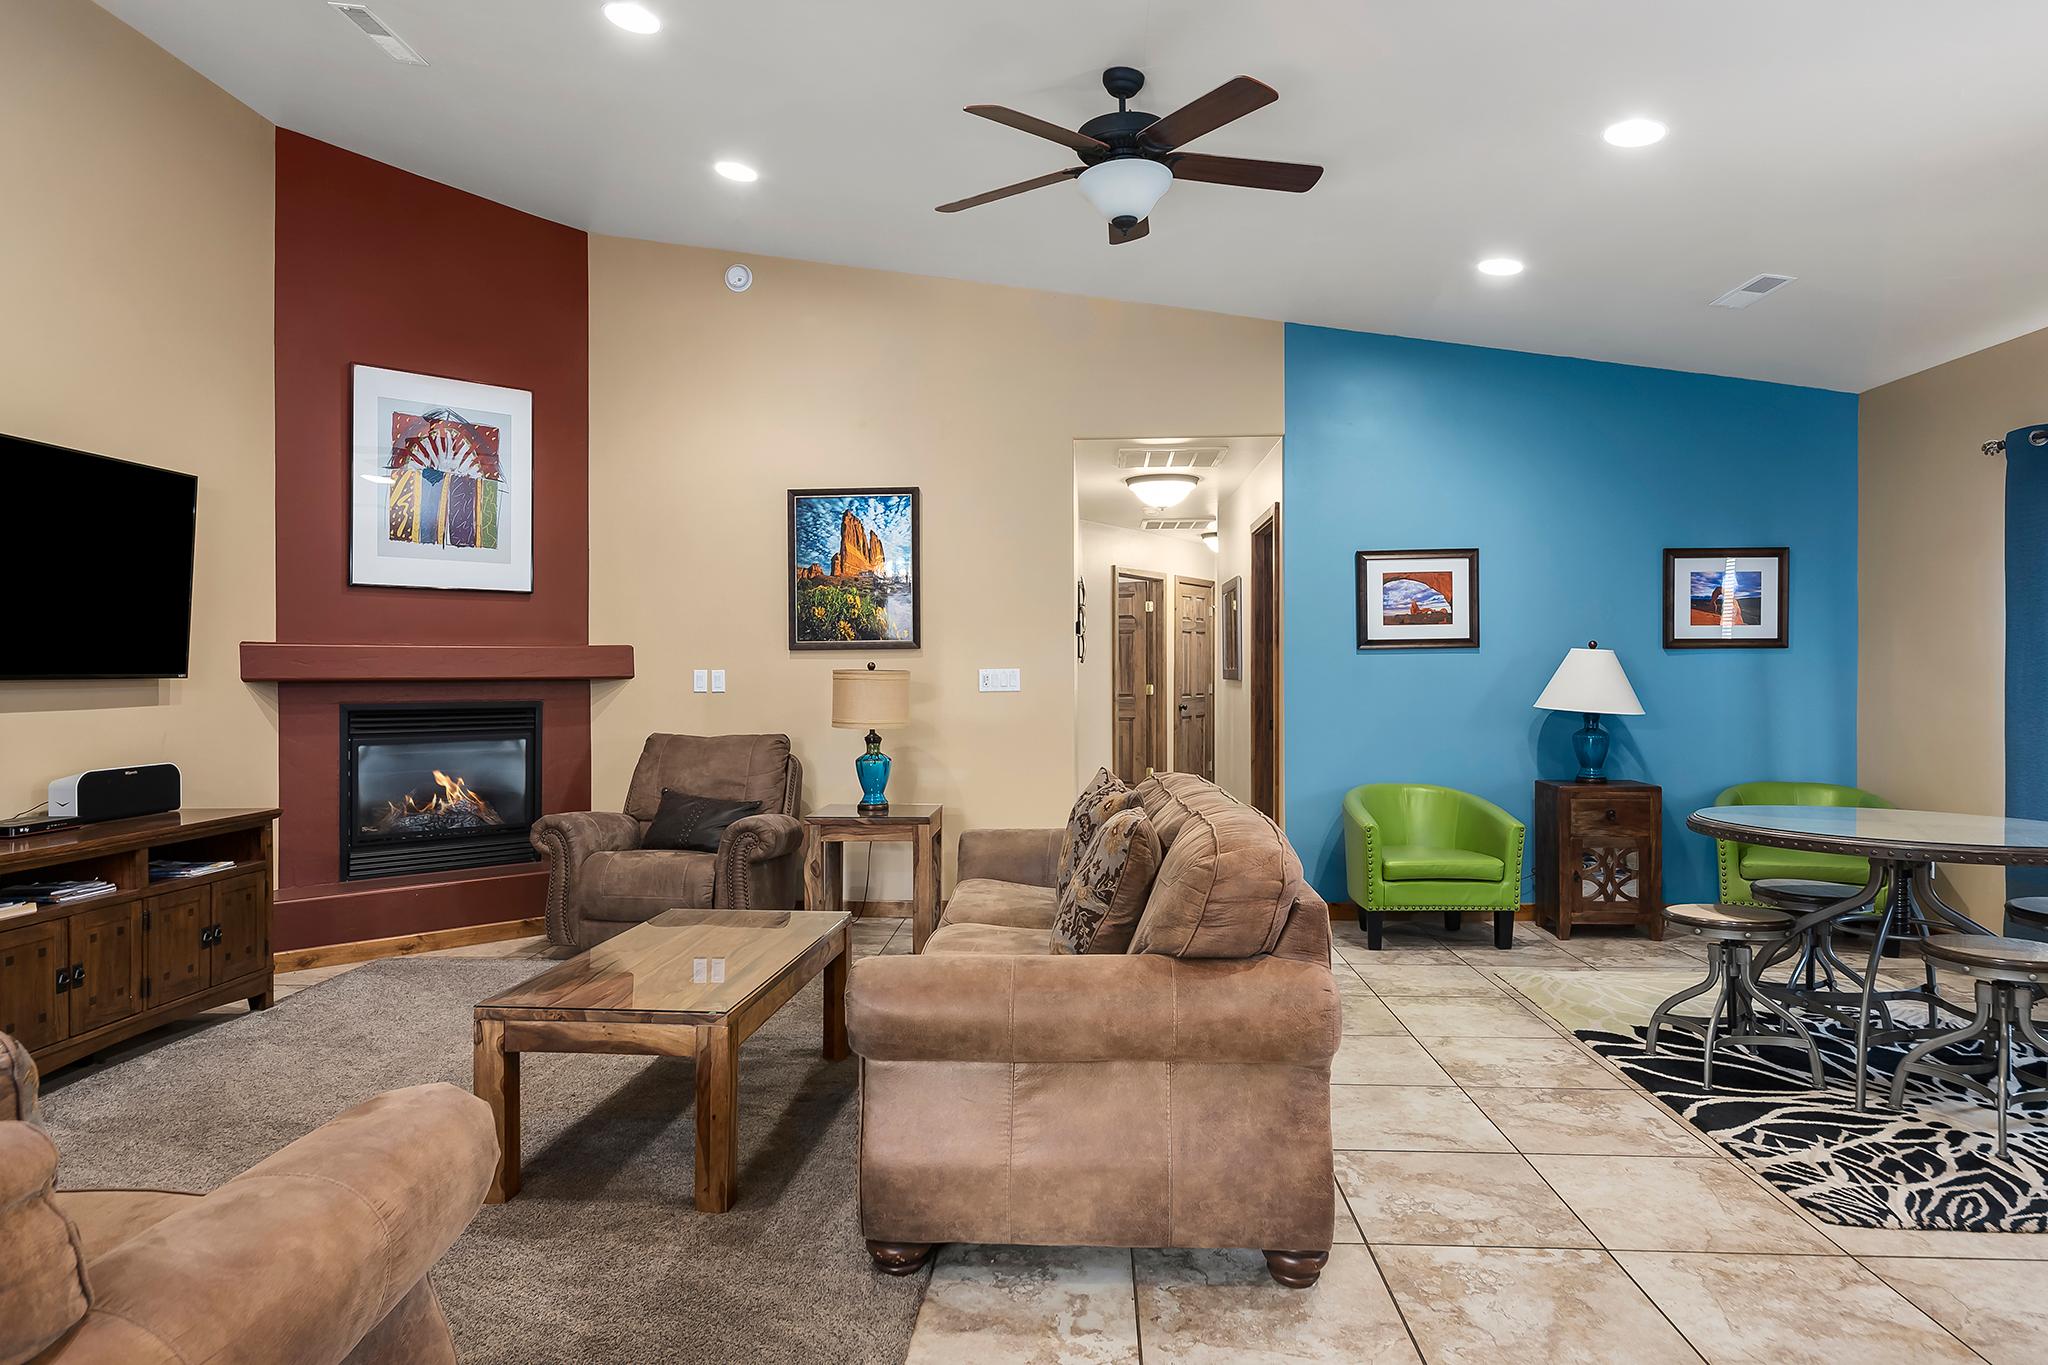 Beautiful open concept living space with plenty of seating and a gas fireplace